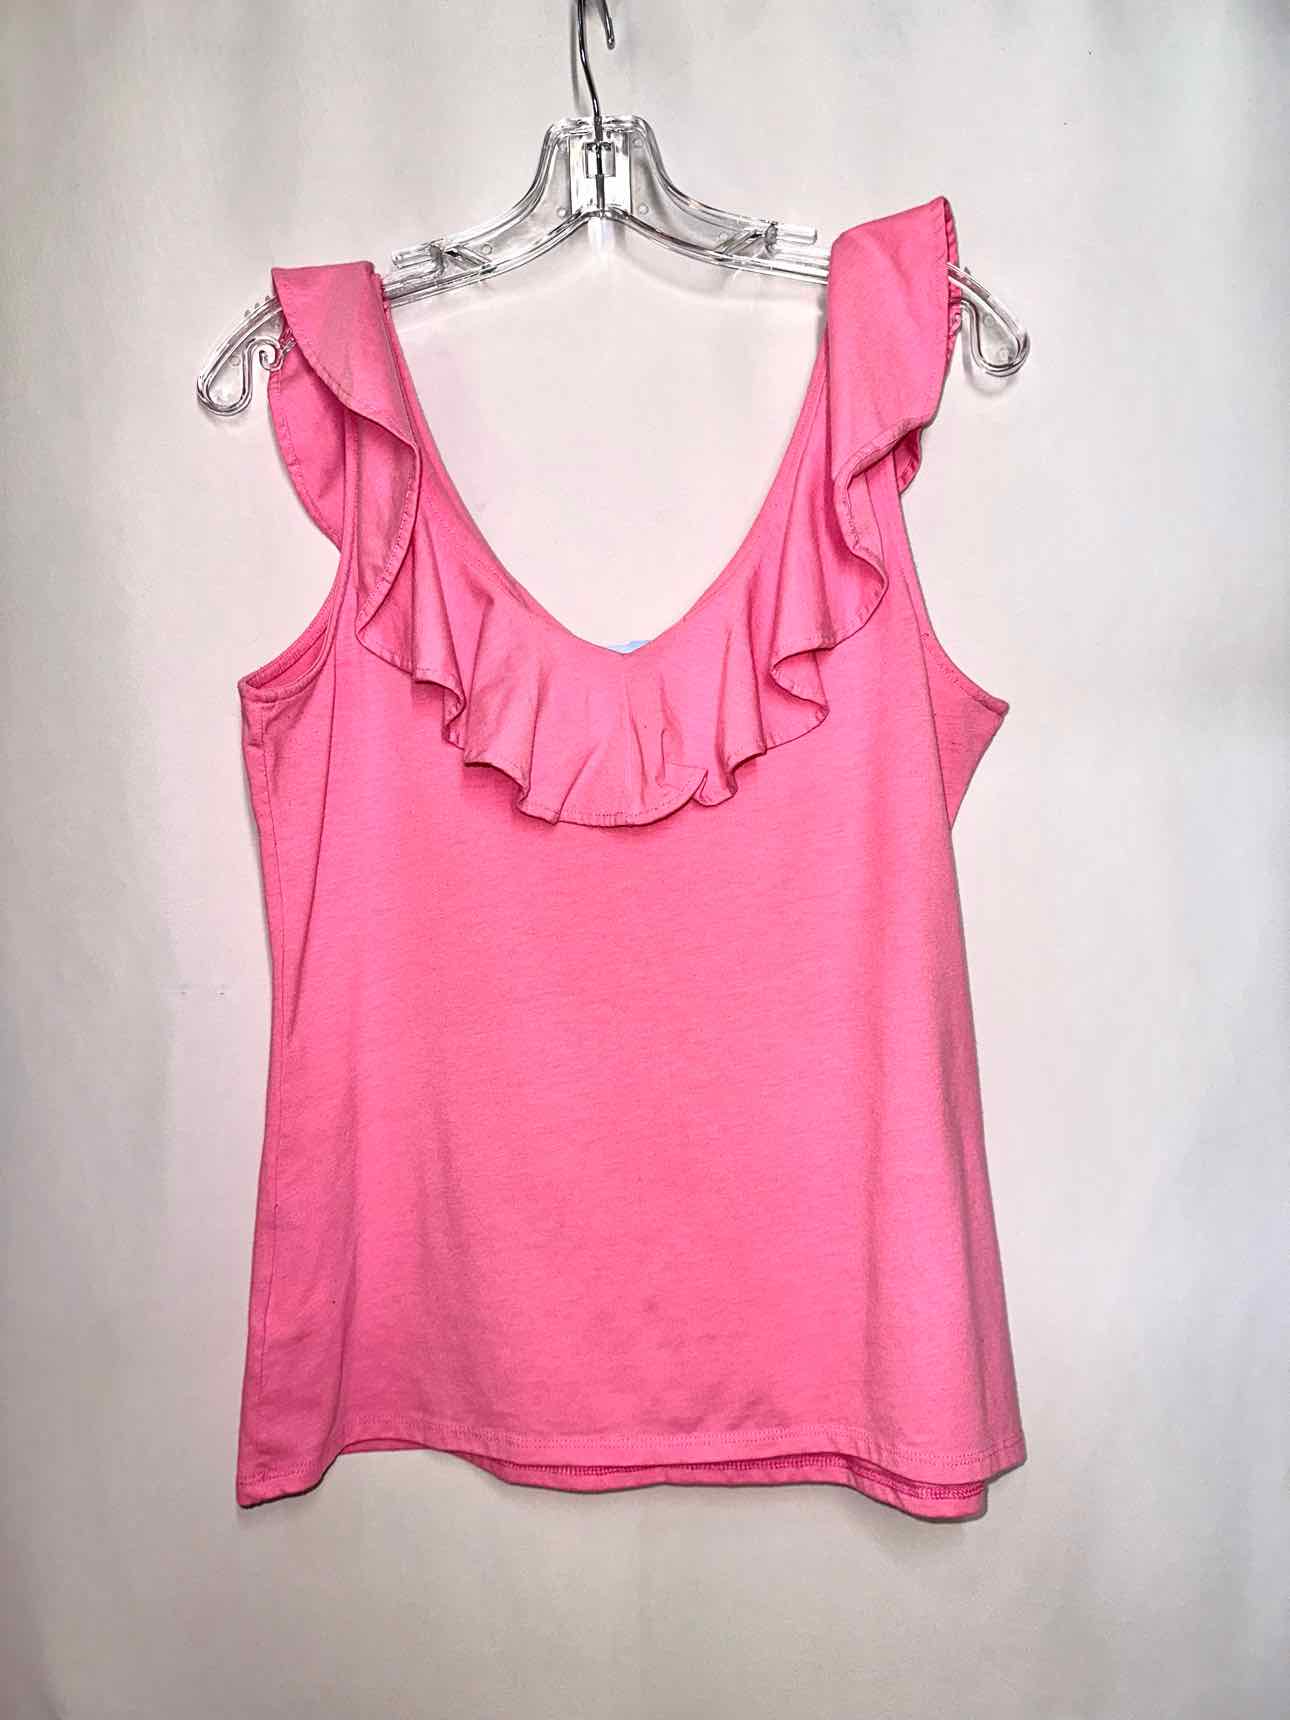 Lilly Pulitzer Alessa Ruffle Tank Top in Paradise Pink